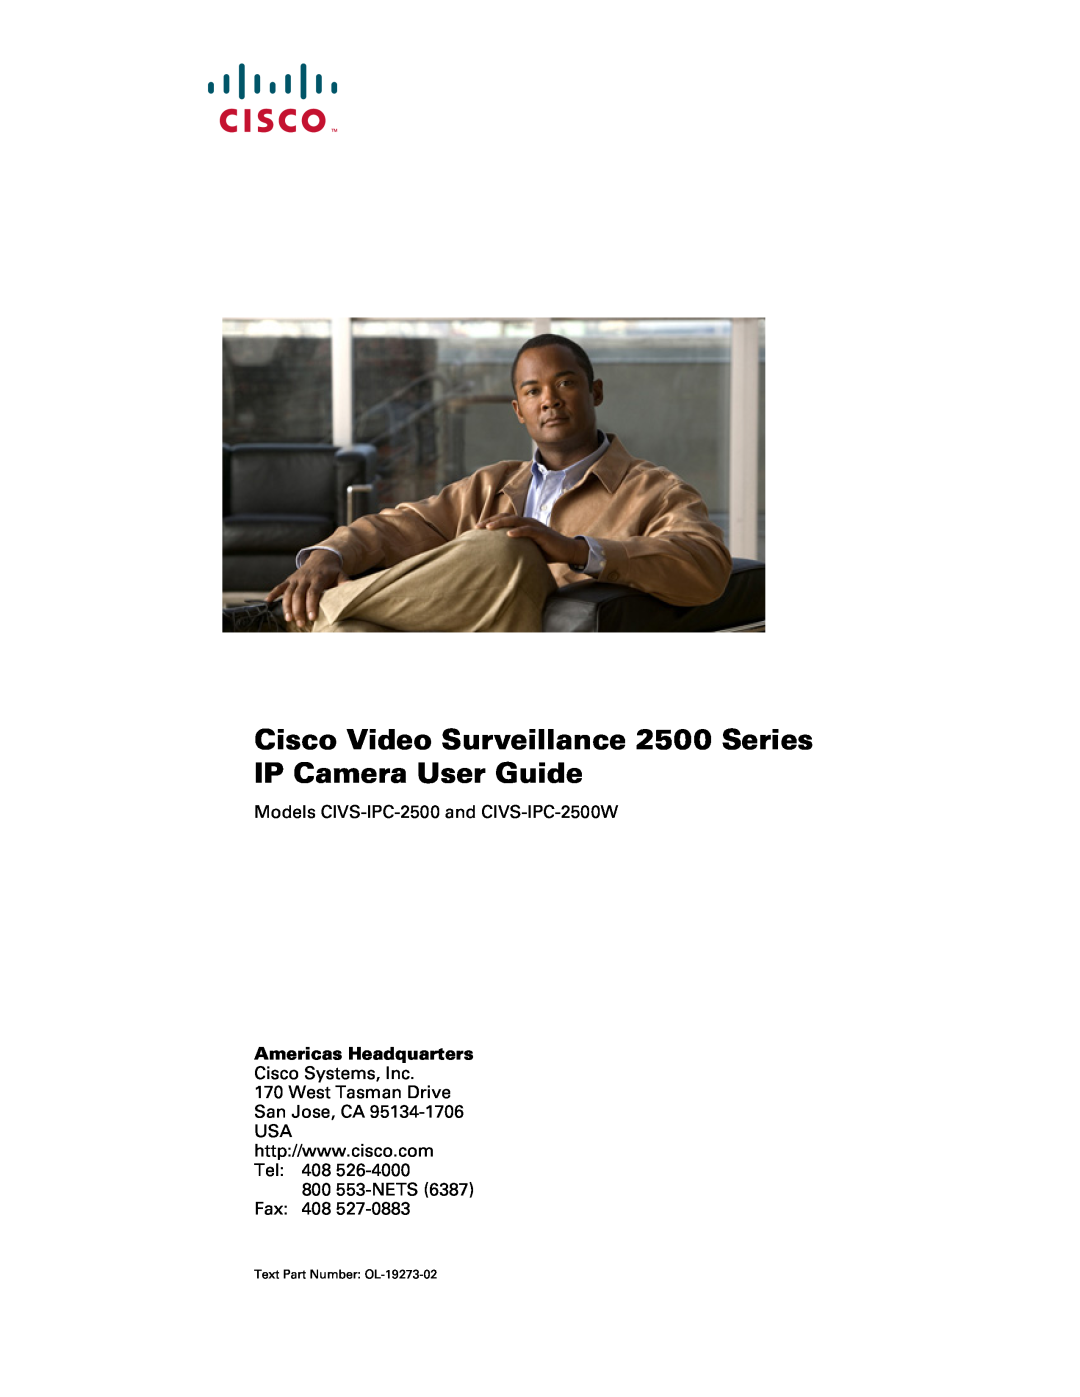 Cisco Systems 2500 Series manual Contents, Introduction, Prerequisites, Document ID, Requirements, Components Used 